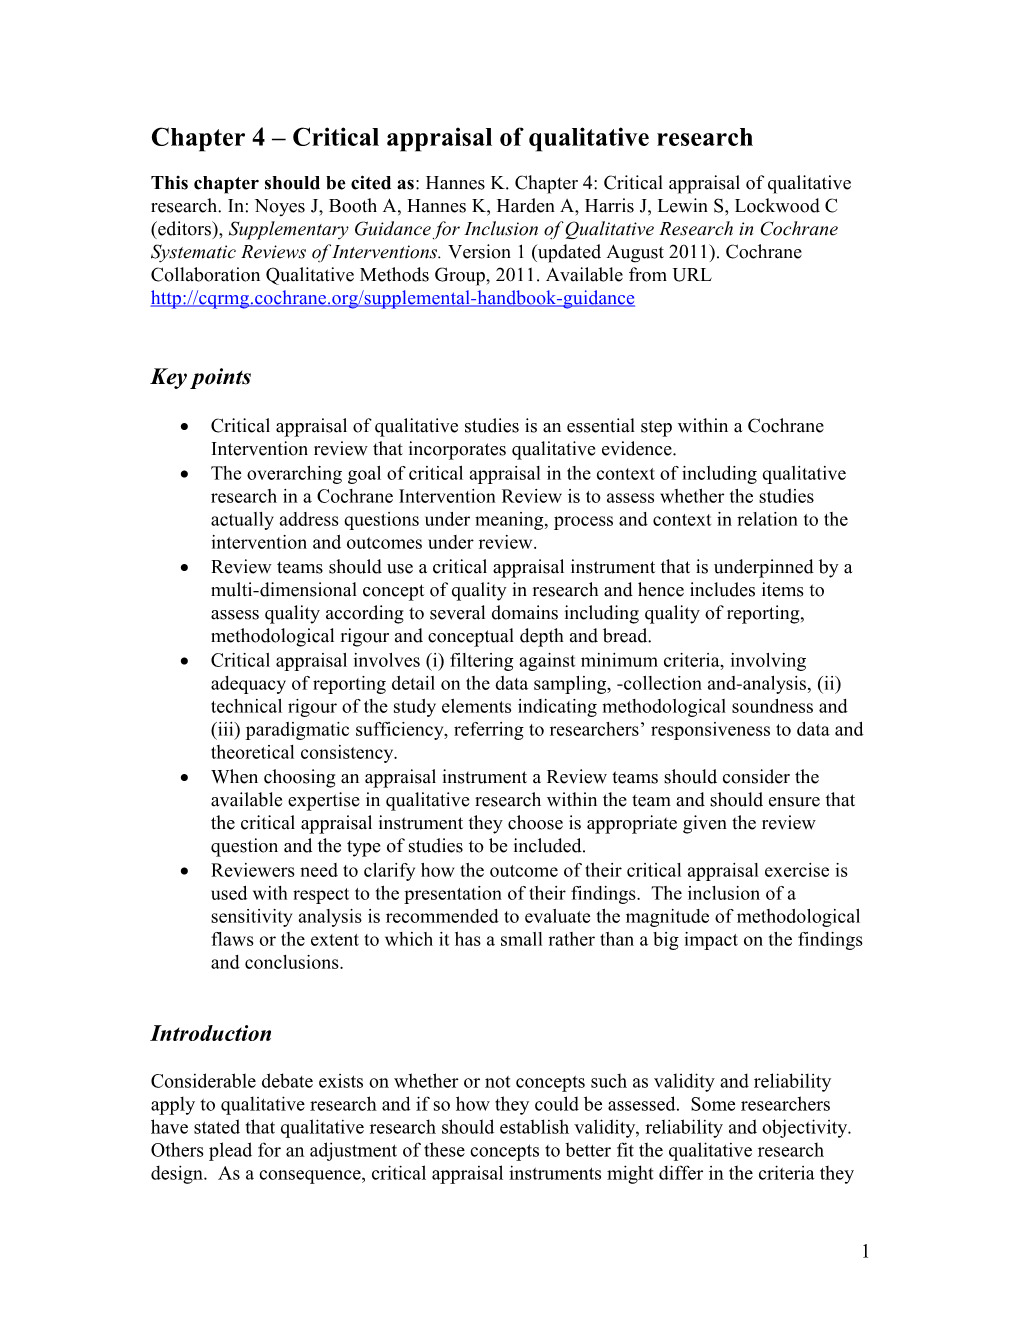 Guidance: Quality Assessment of Qualitative Research: How to Critically Appraise Qualitative